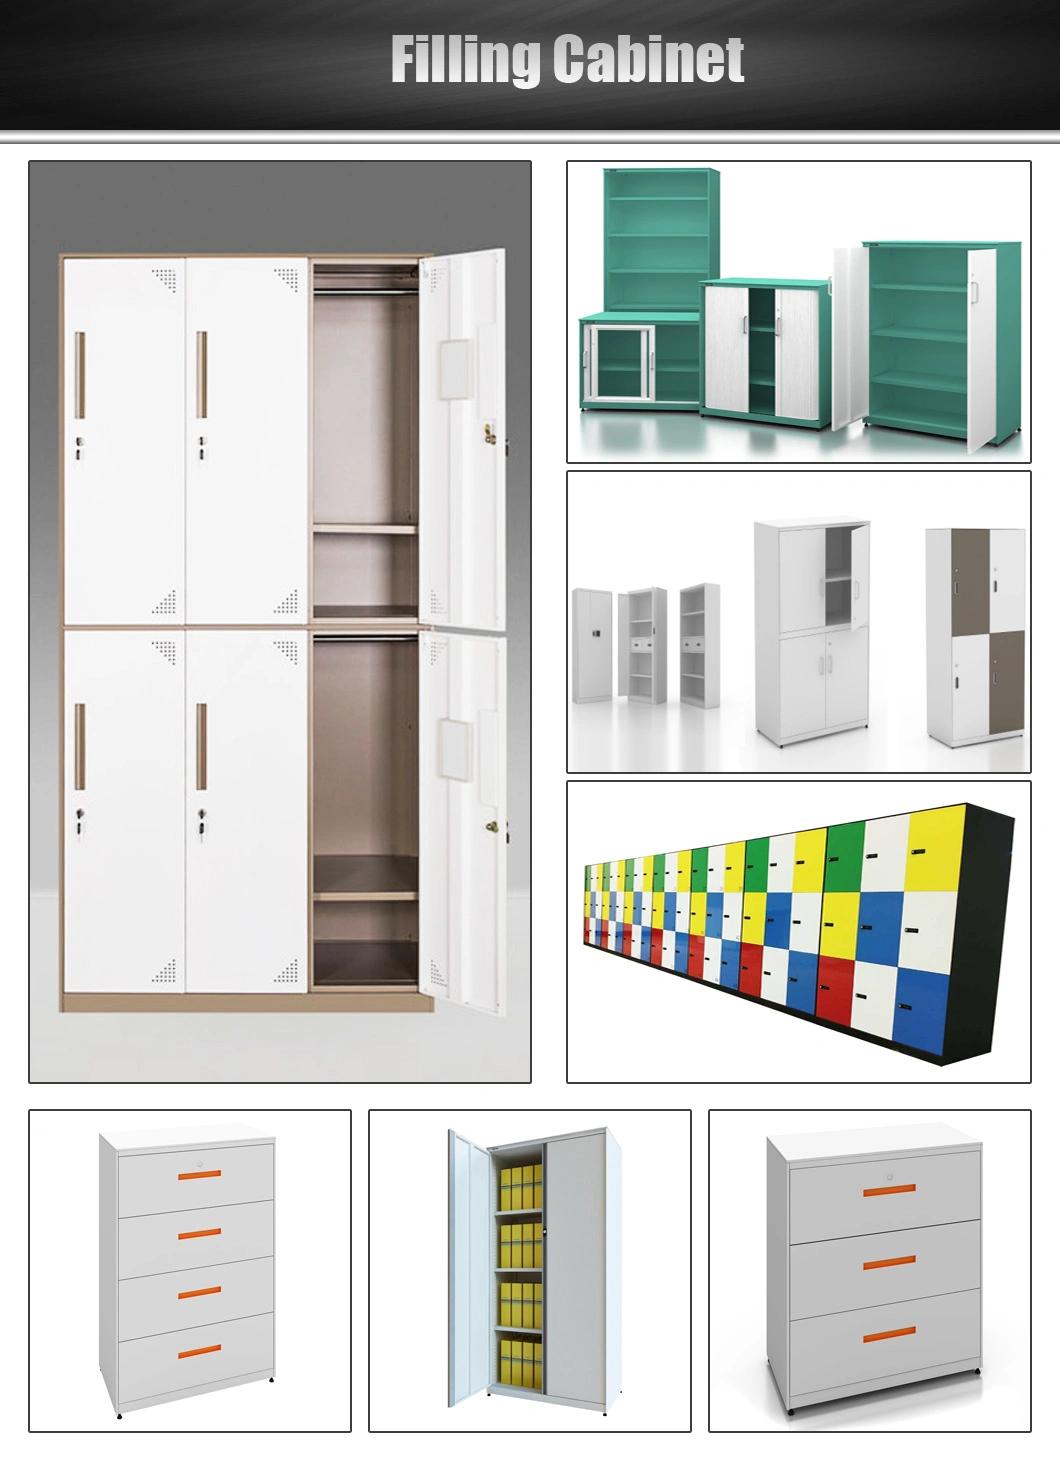 Dependable Performance Work Storage Cabinets with Environmentally-Friendly Materials